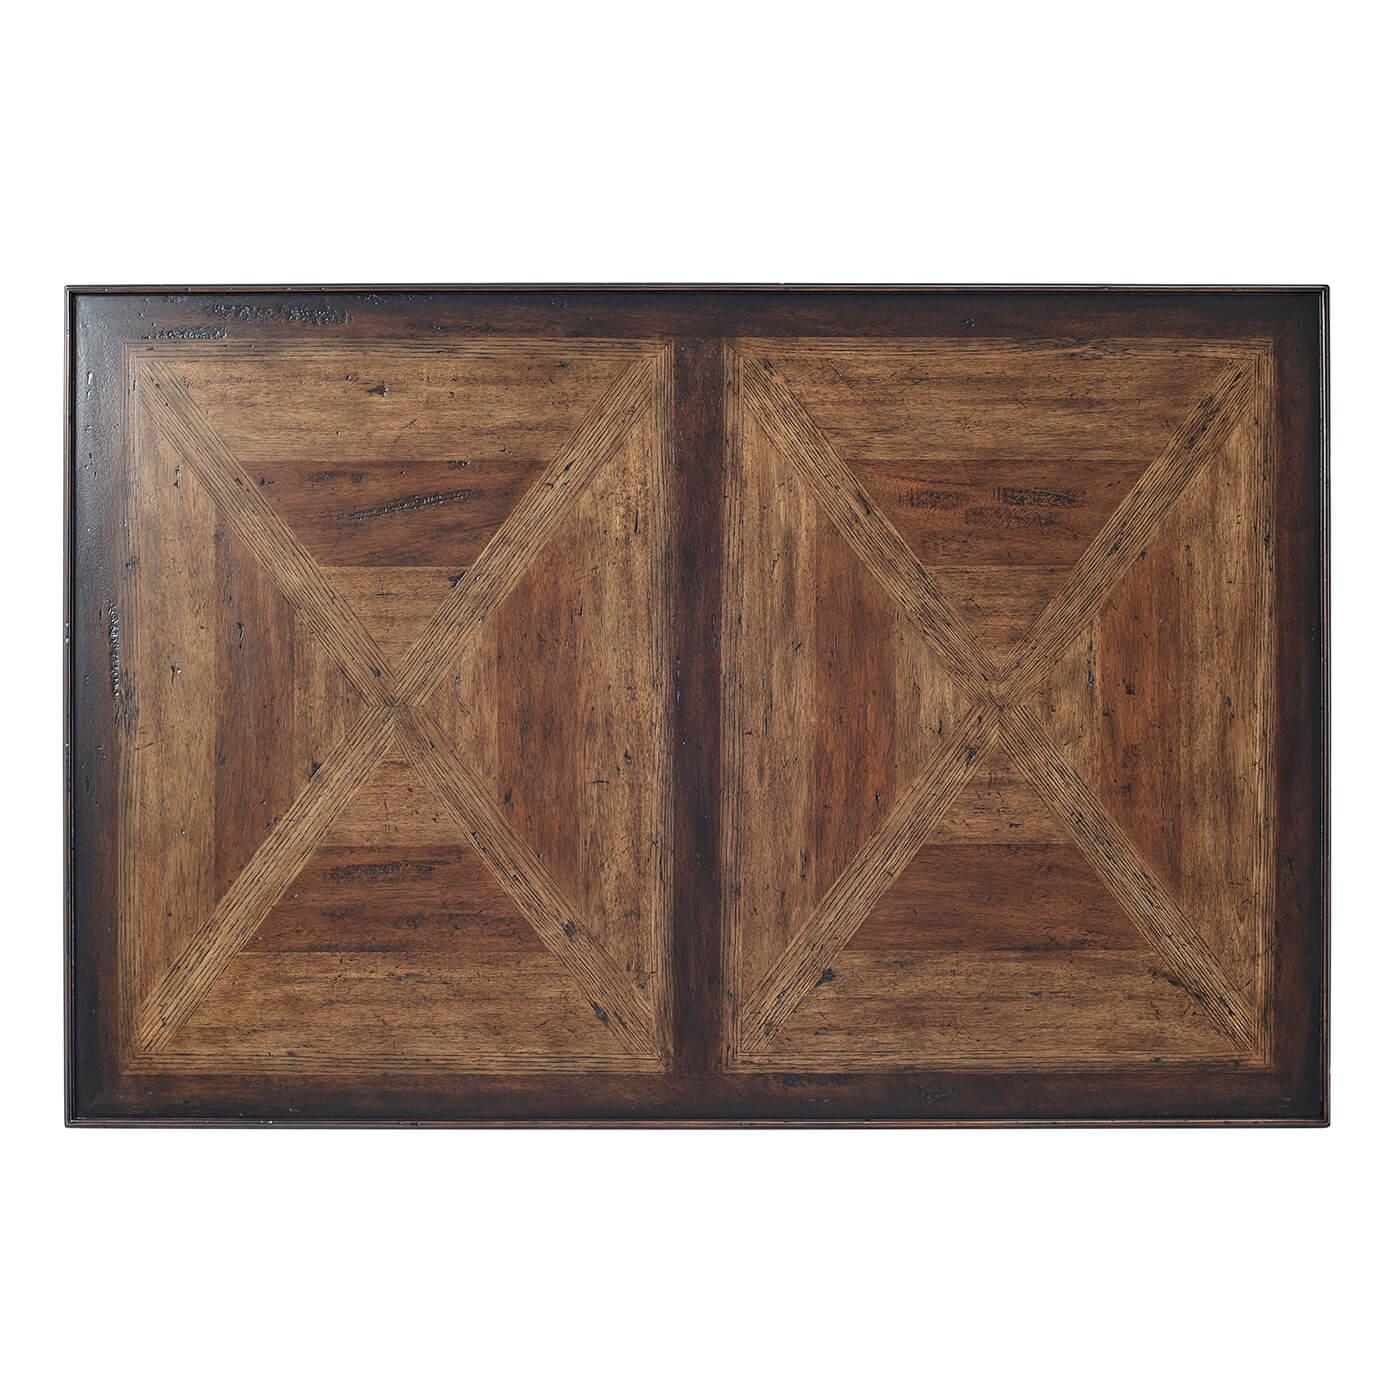 Italian Provincial mahogany with oak and Acacia Parquetry coffee table with ebonized details. A similar under tier with chamfered 'X' sides, chamfered legs and paneled tapered Feet.
Dimensions: 54